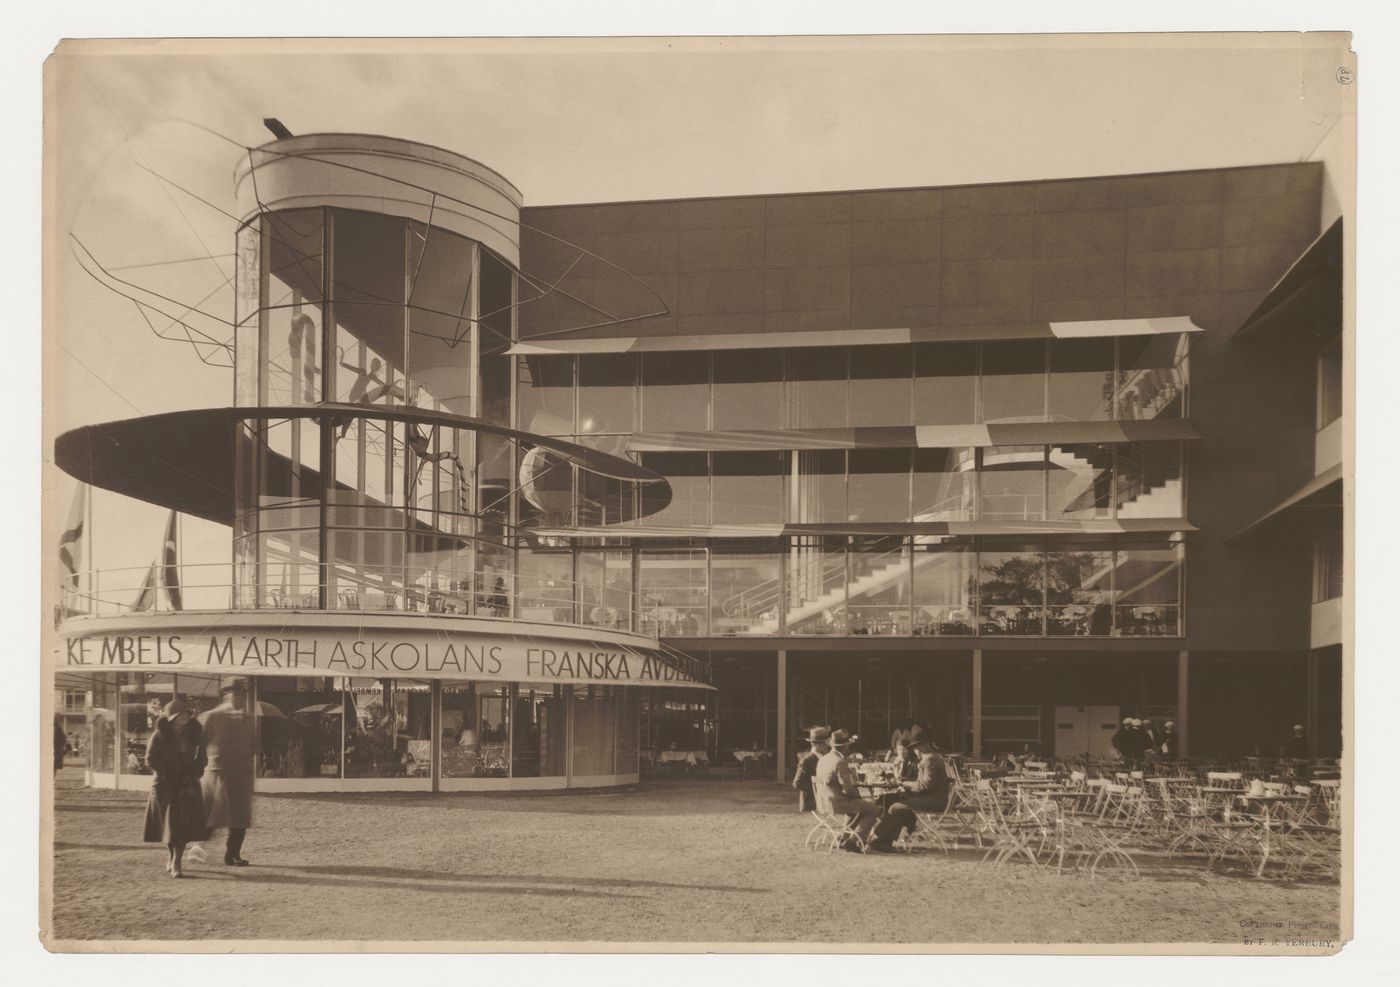 View of the lateral façade of Paradise Restaurant at the Stockholm Exhibition of 1930 showing the terrace with tables and chairs, Stockholm